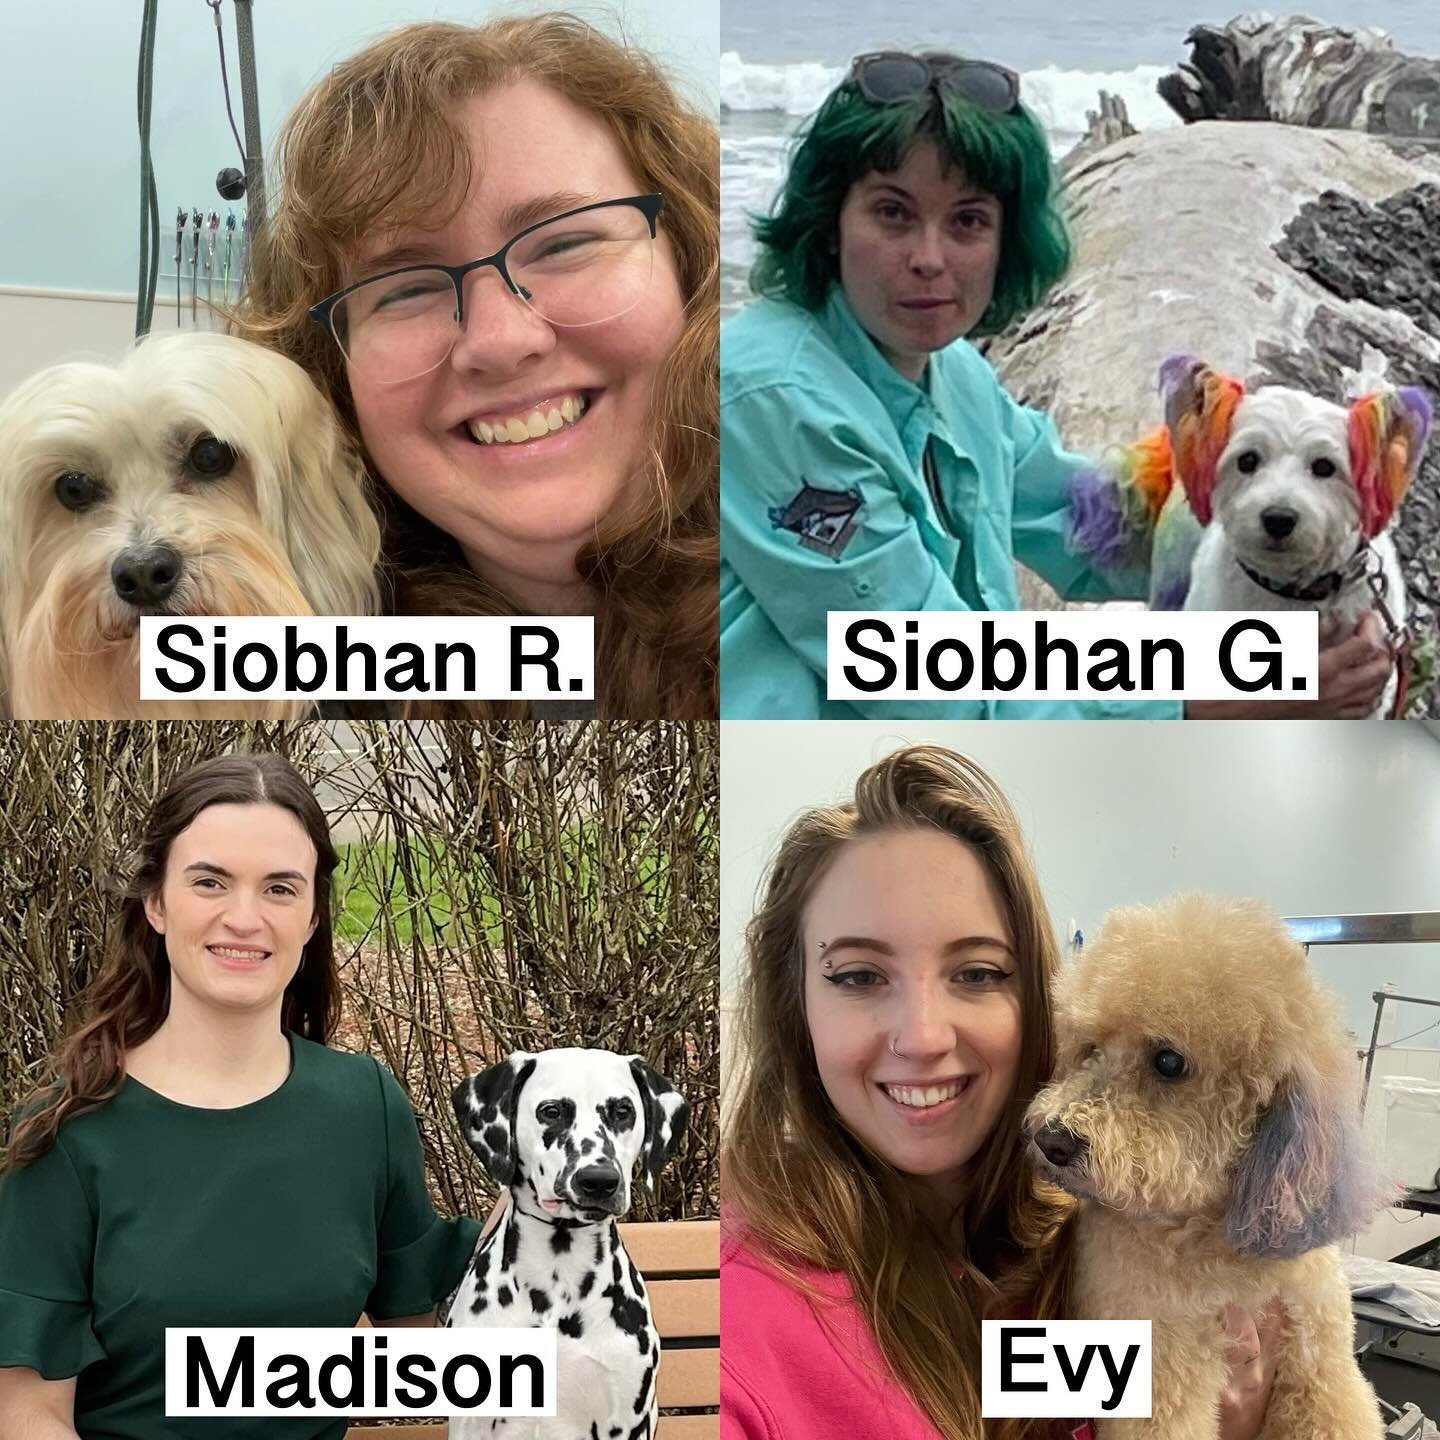 We now having full service grooming available 7 days a week at our Terwilliger location! Siobhan R. and our newest groomer, Madison are available for professional grooms, and Evy and Siobhan G. are available for basic baths and nail trims! Call us to